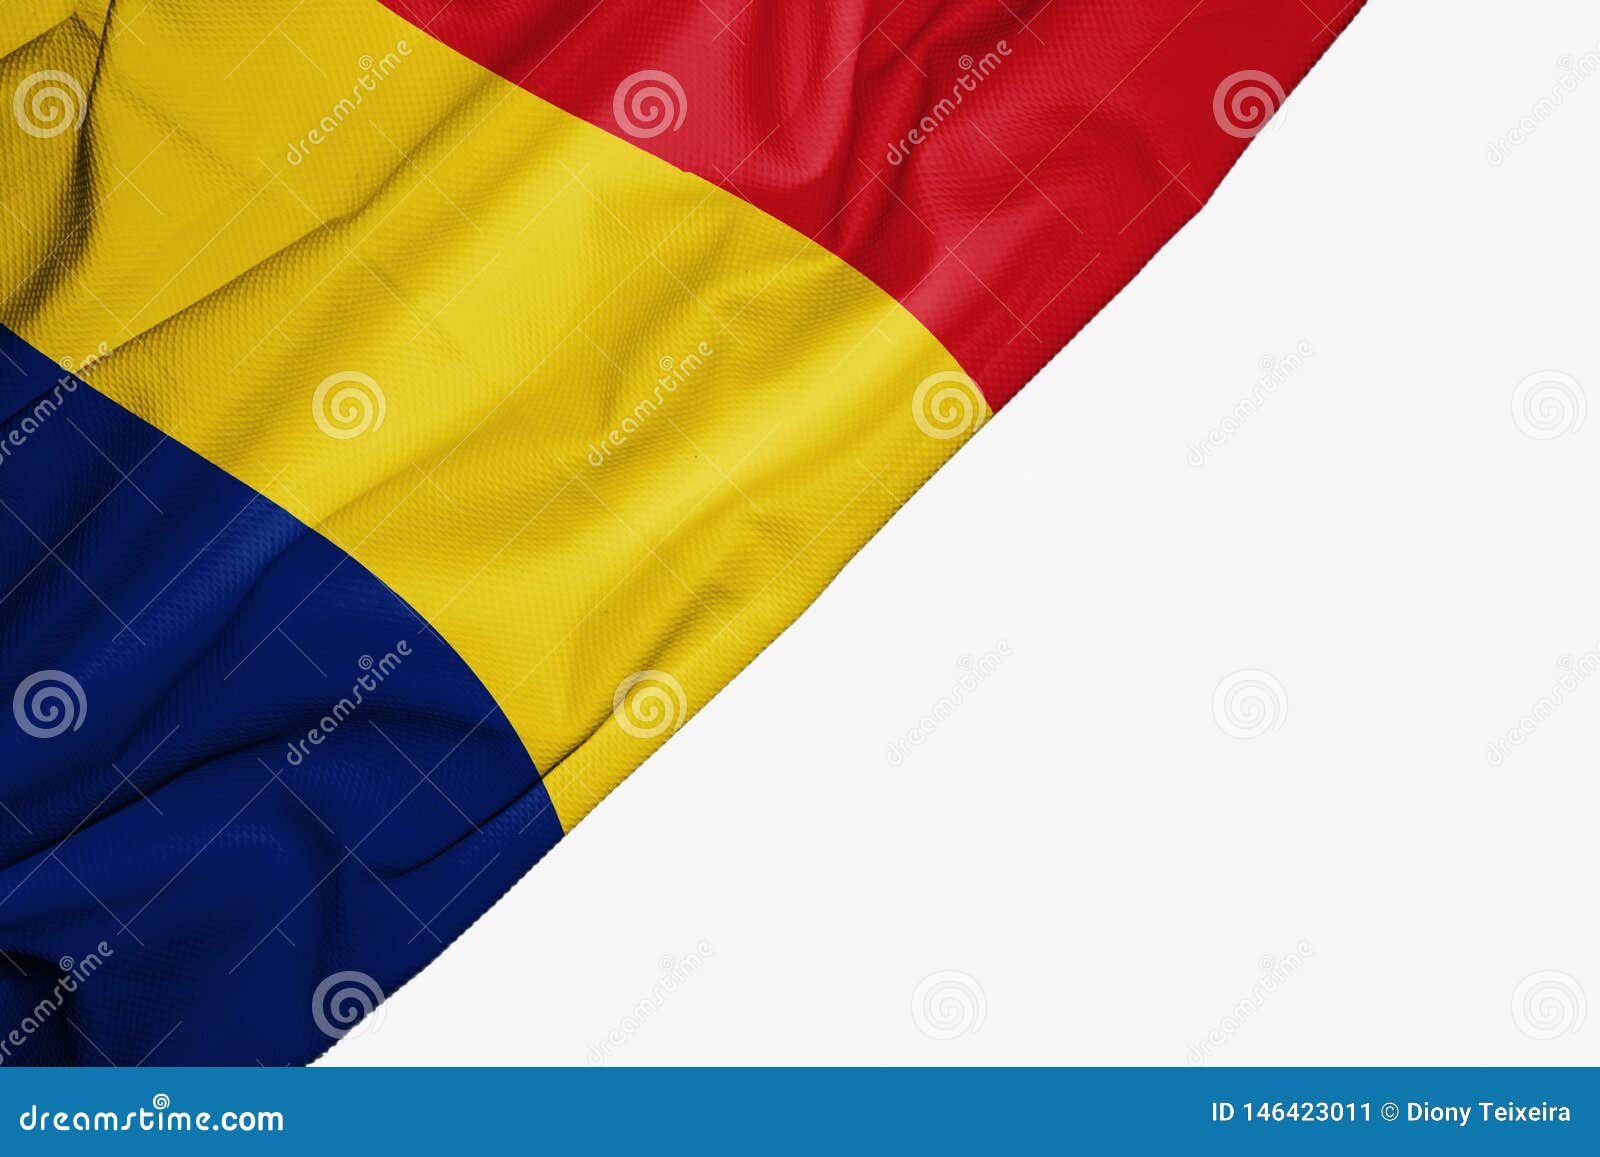 Romania Flag of Fabric with Copyspace for Your Text on White Background ...